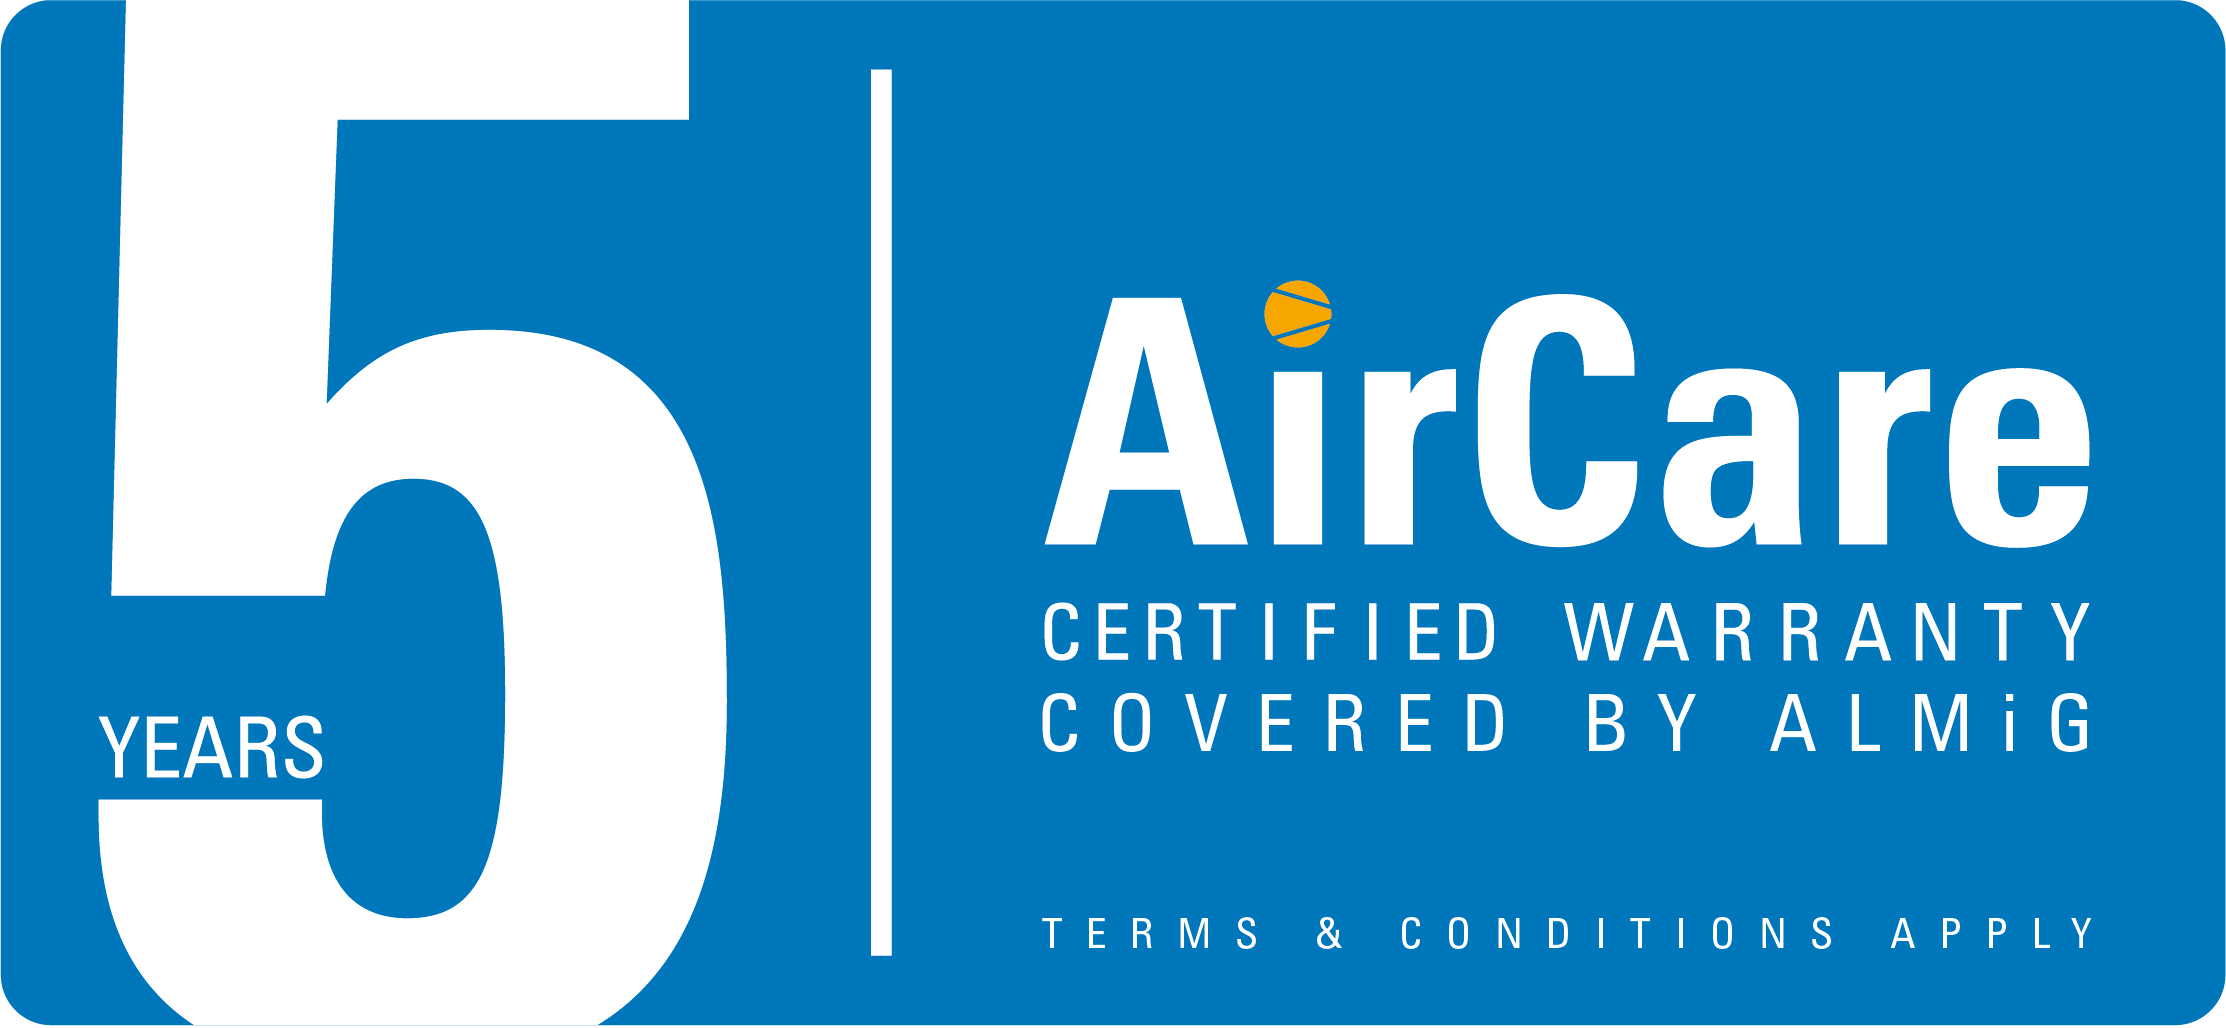 AirCare 5 years